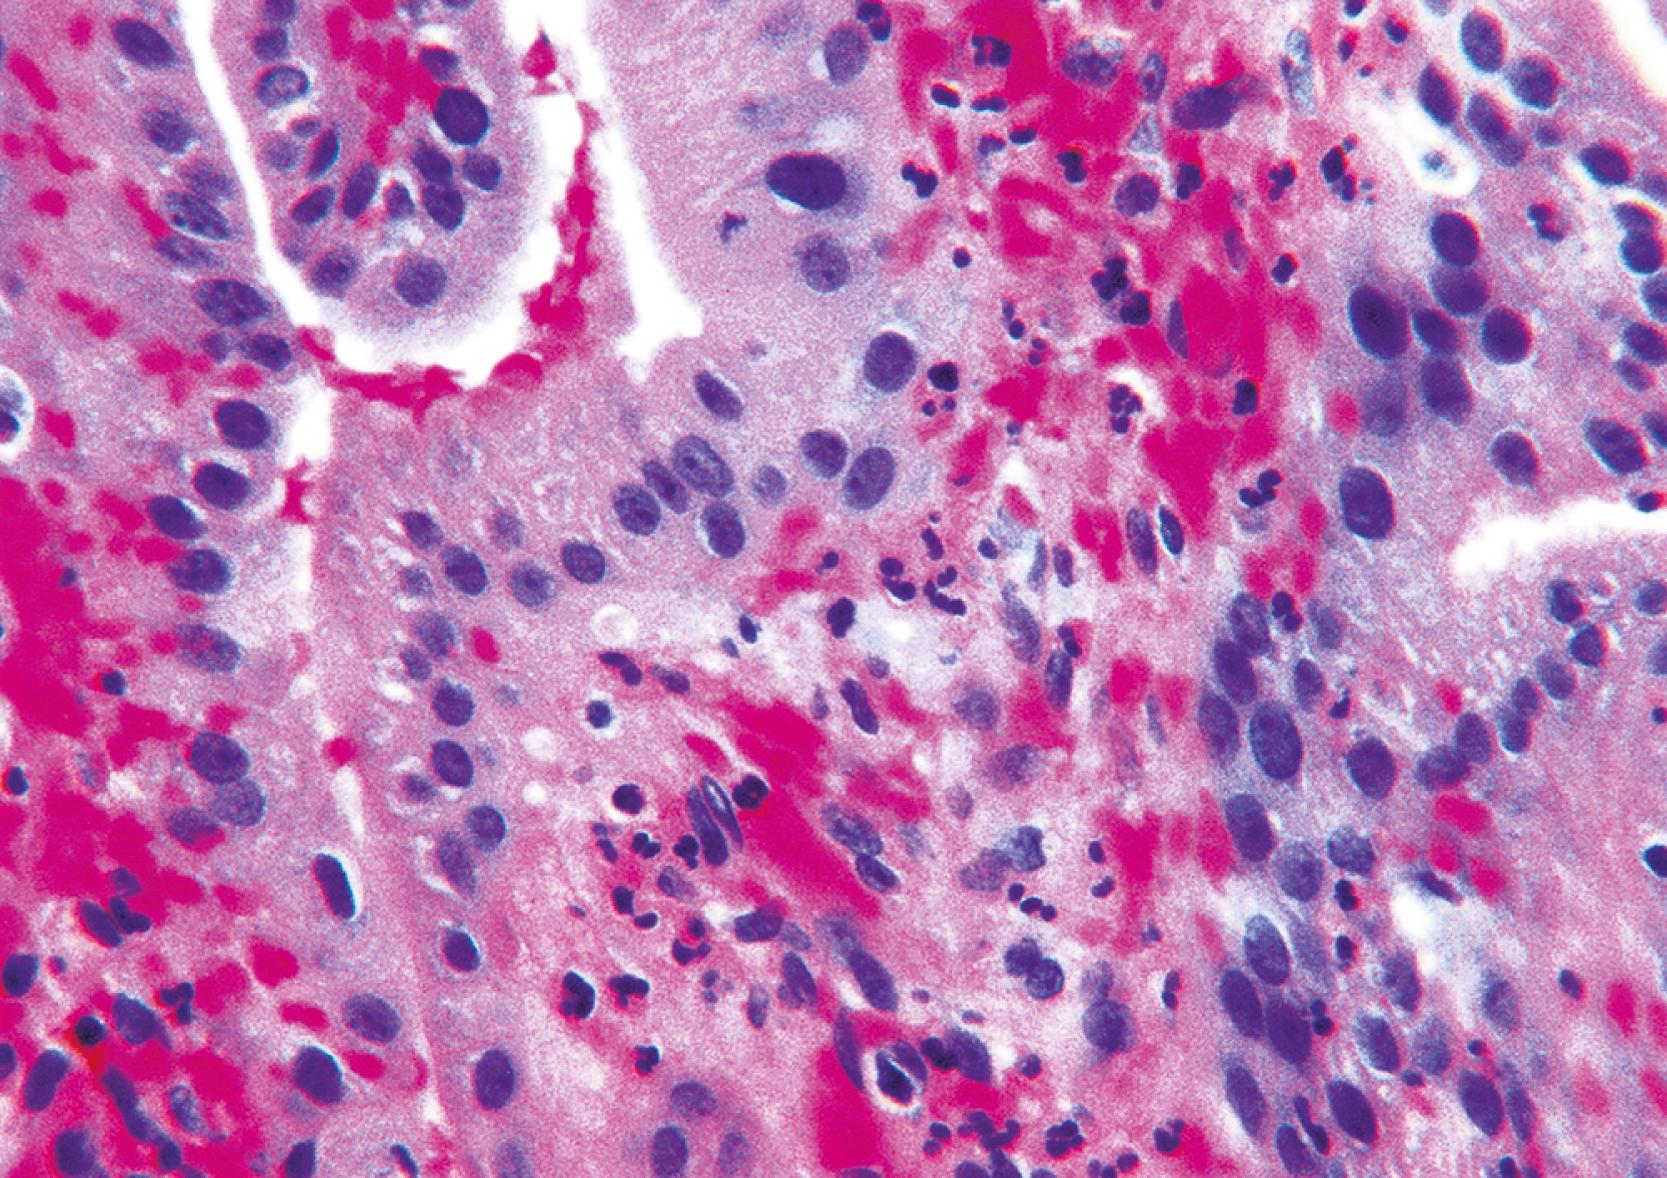 FIGURE 38.3, In the early phases of acute cholecystitis, neutrophils predominate, and the lamina propria is frequently hemorrhagic.